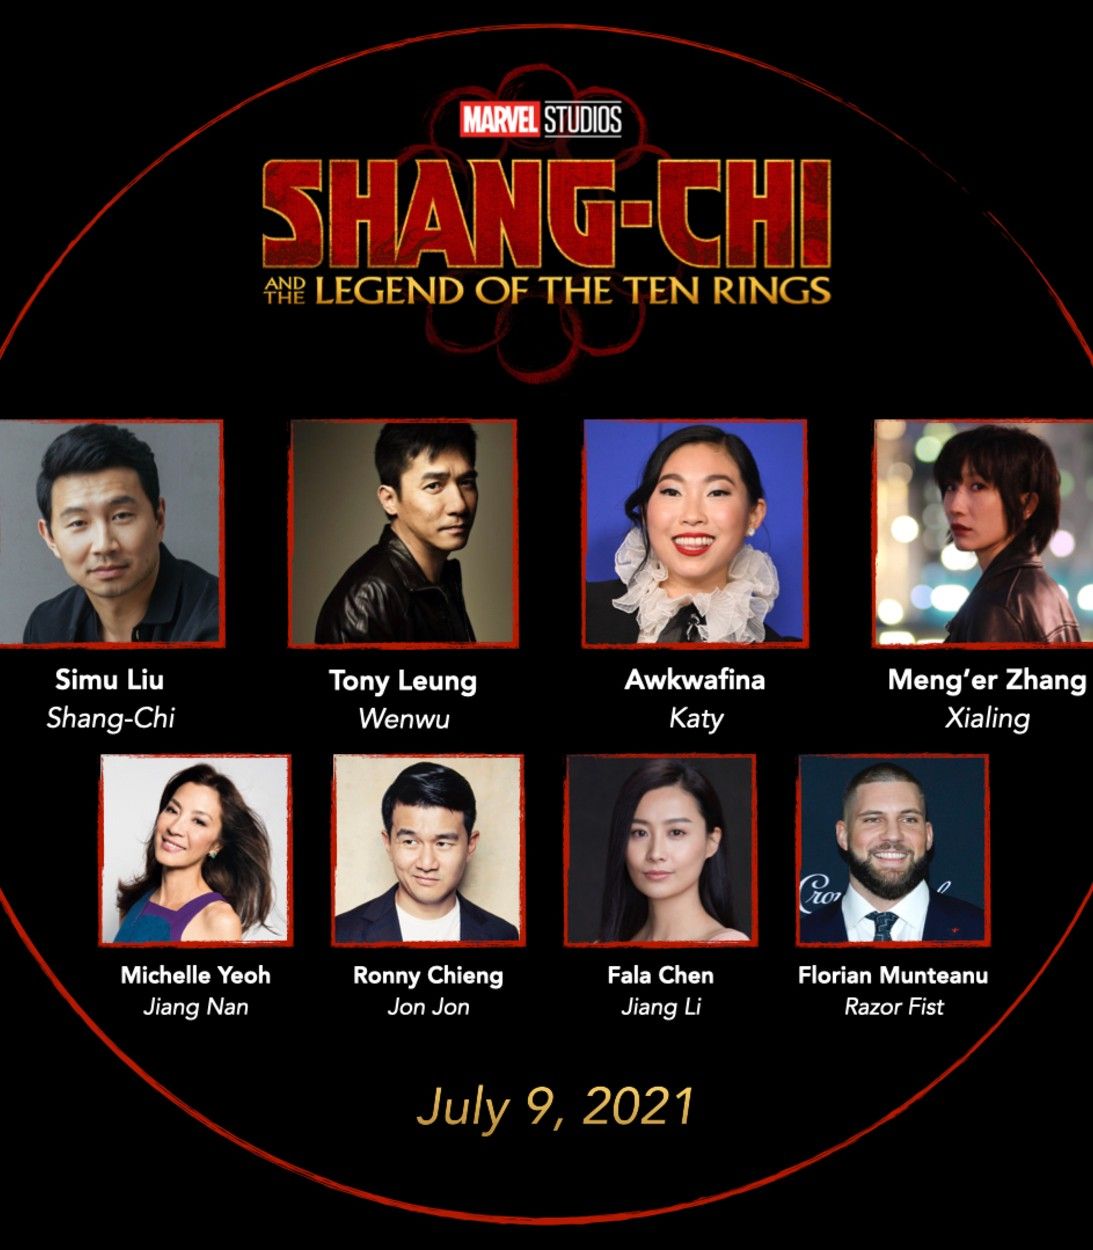 Shang-Chi and the Legend of the Ten Rings cast vertical